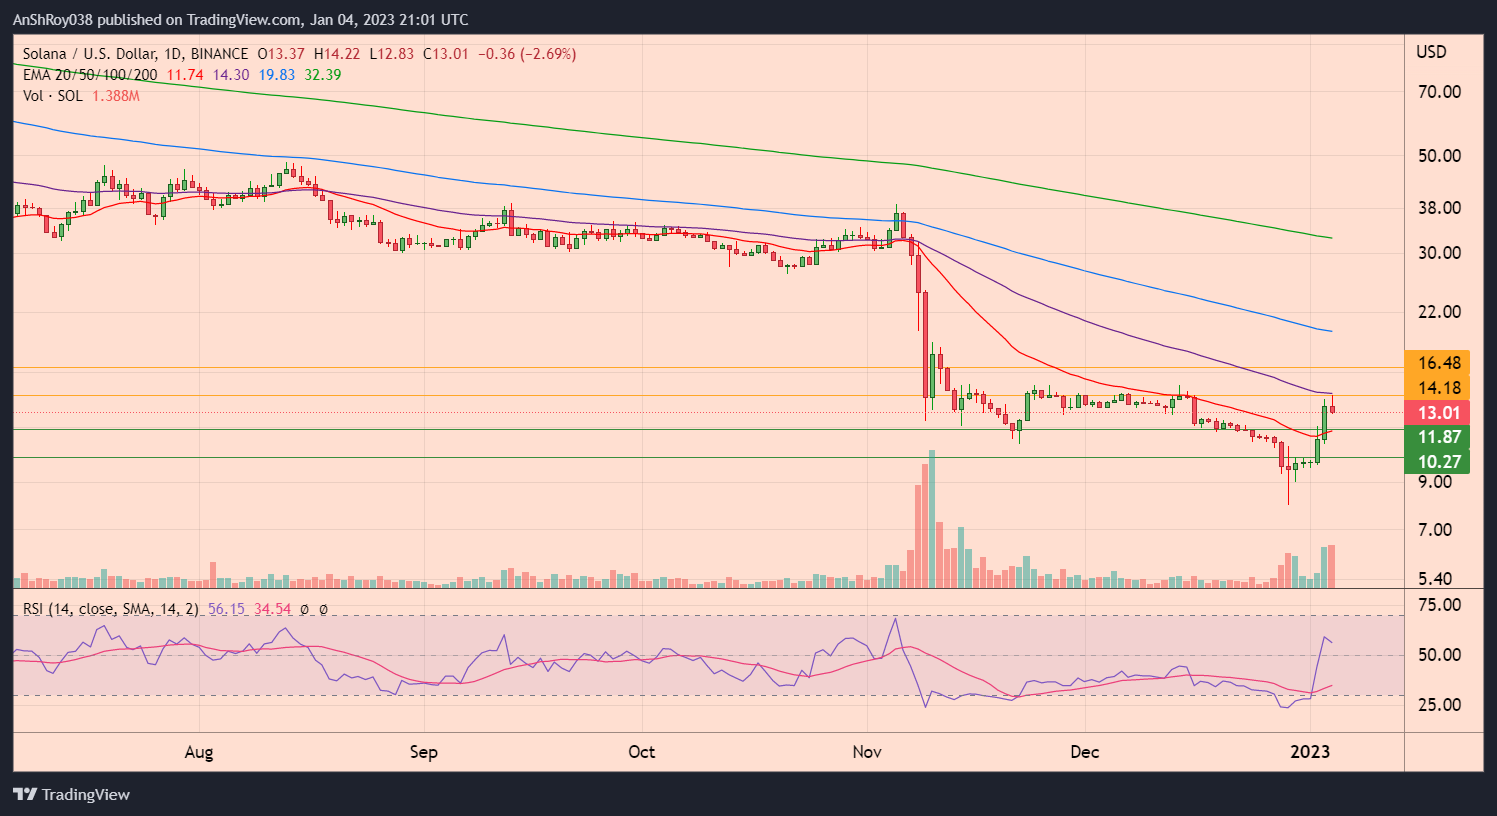 Solana (SOL) price failed to clear 50EMA resistance